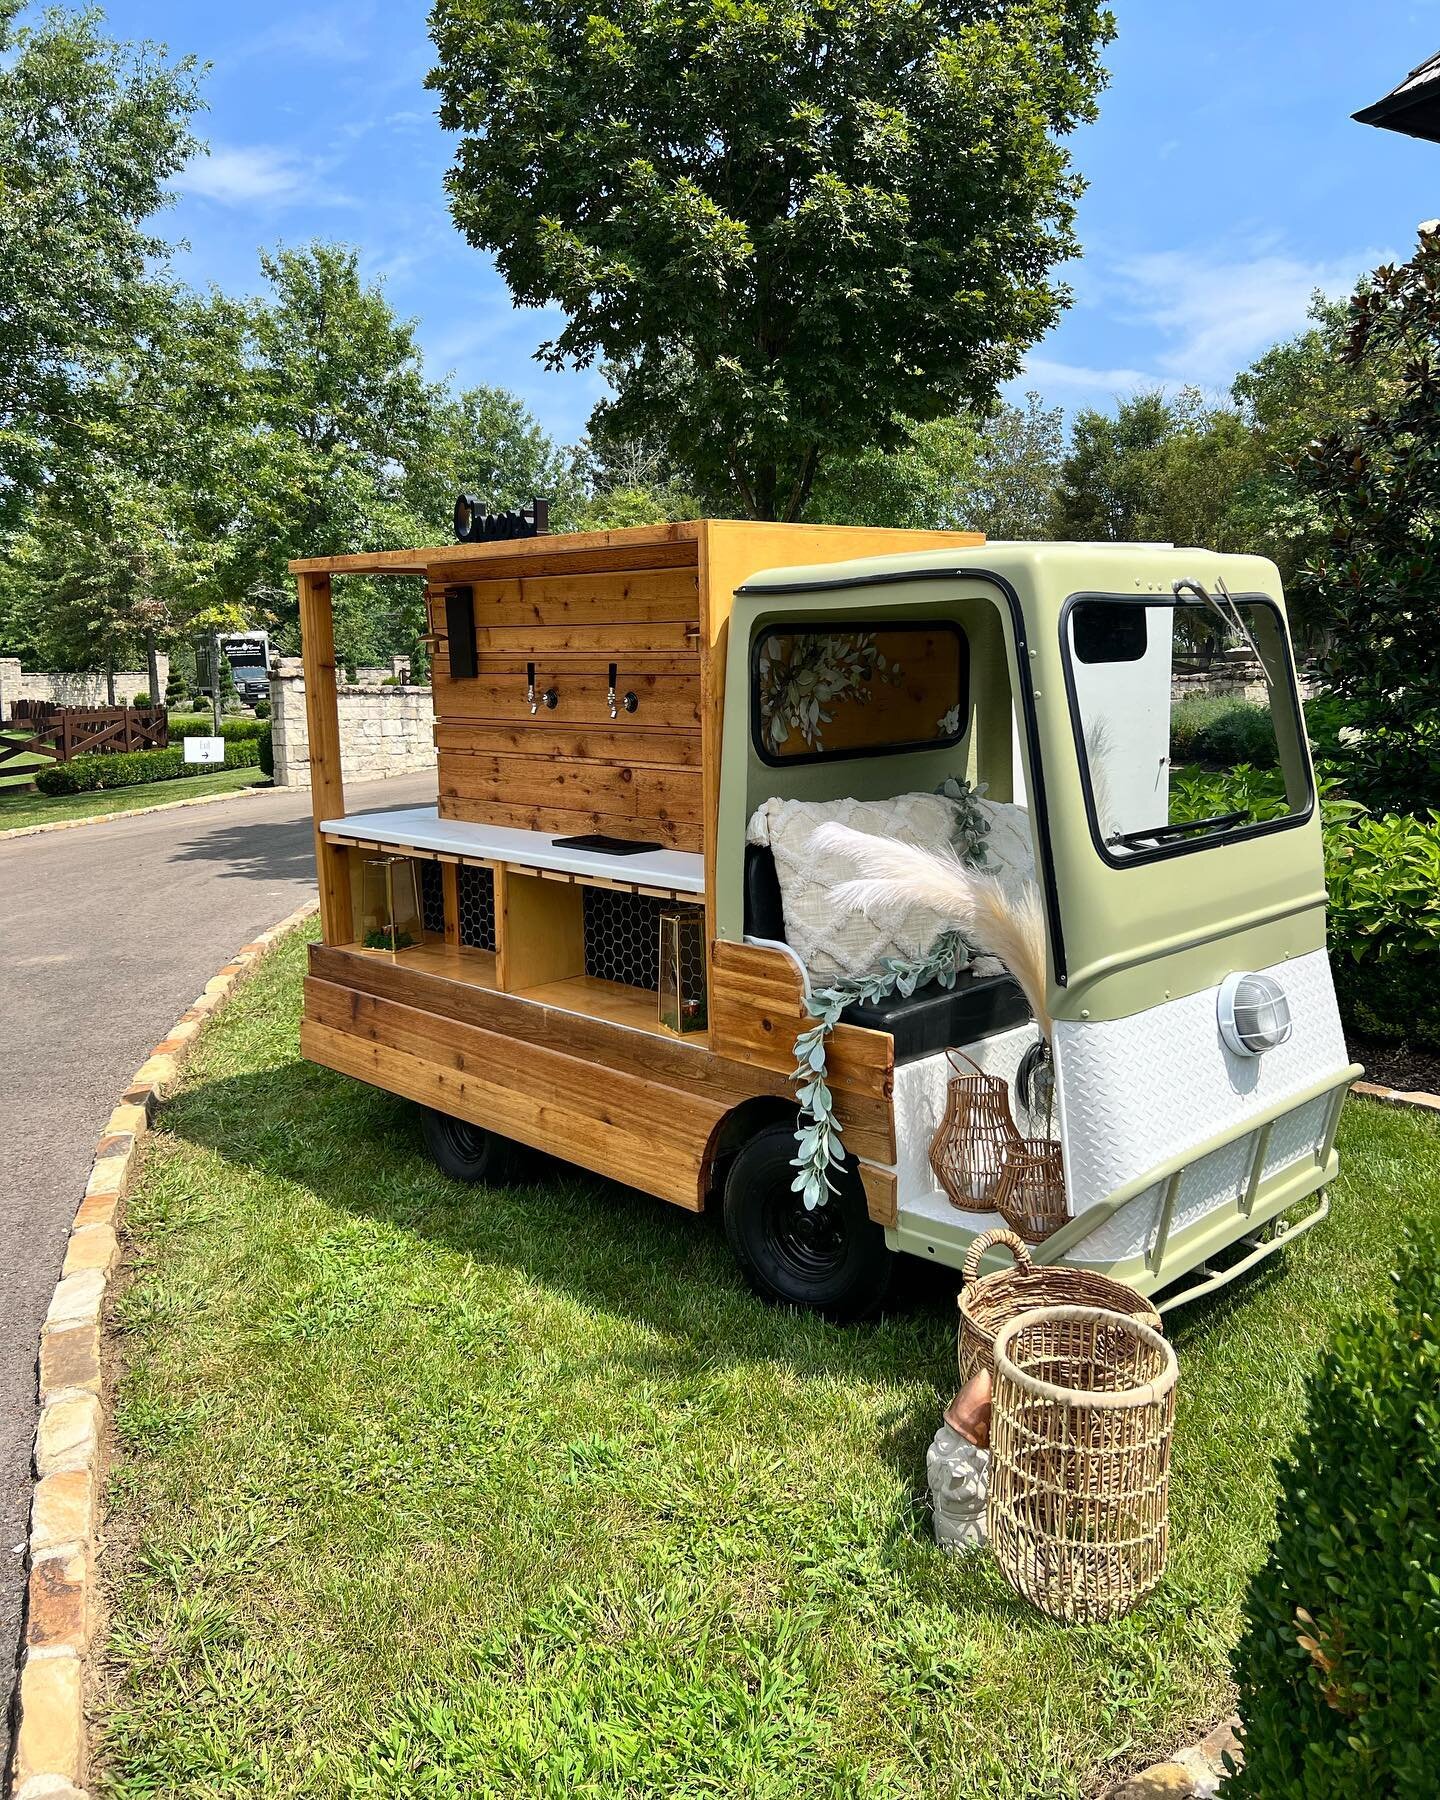 From sunshine to rain, we got you covered! The Tiny Tapper is perfect for your event, rain or shine! #thefizzymule #thetinytapper #mobilebar #columbiatn #franklintn #nashville #weddingmiddletn #cocktailhour #champagnewall #taptruck  Venue: @cortinafa